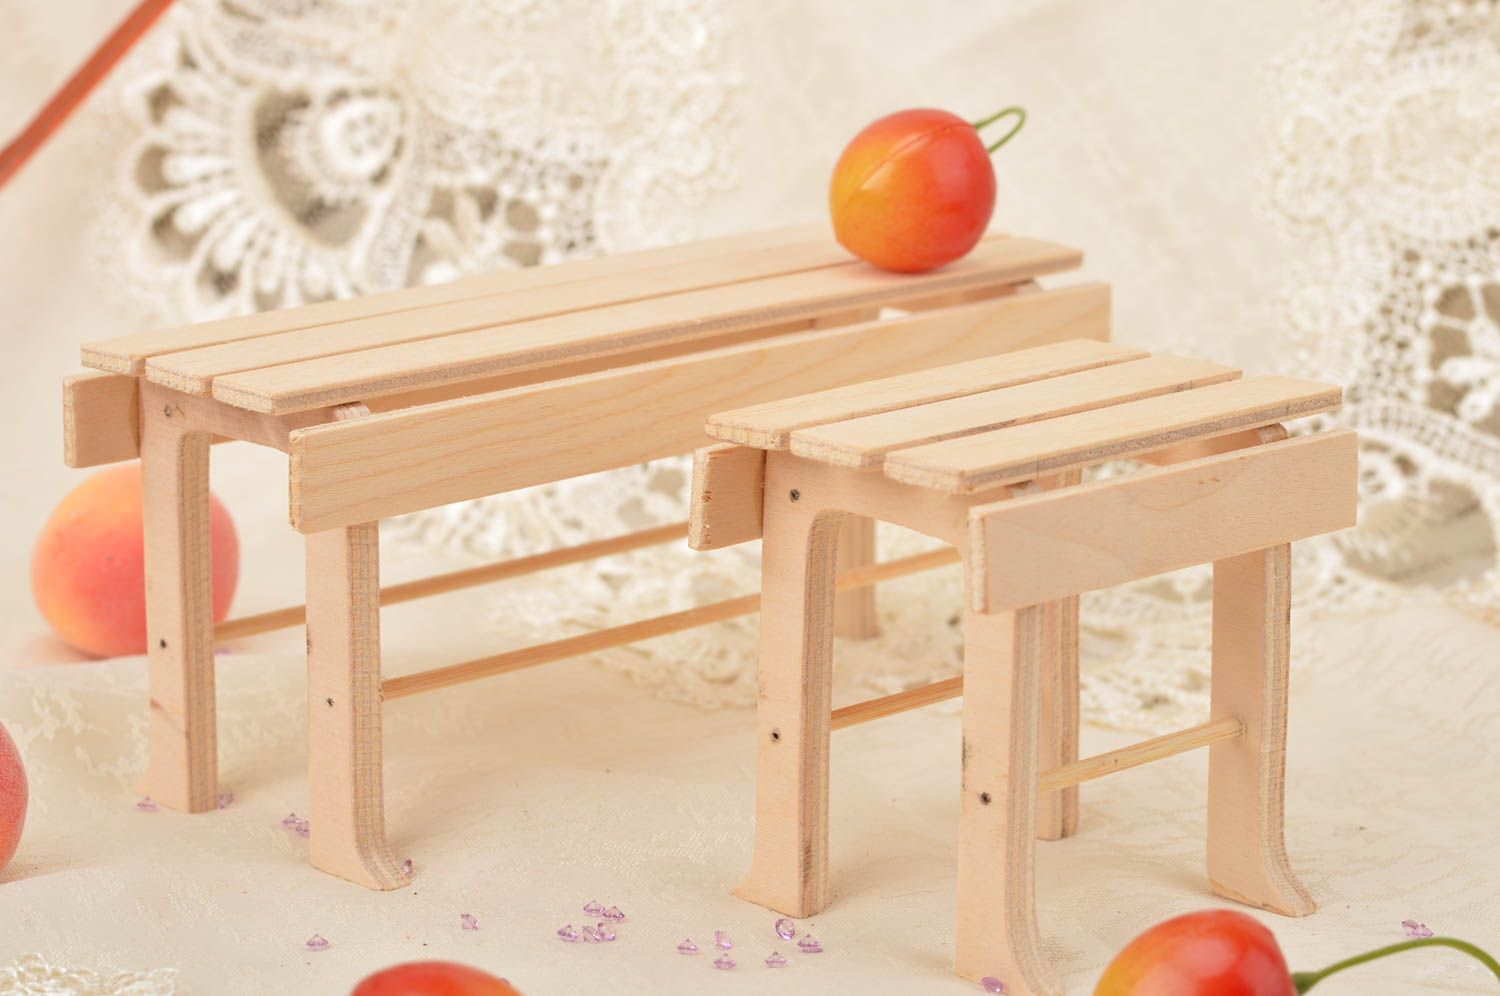 Handmade cute bench and chair for dolls made of plywood for kids games photo 1